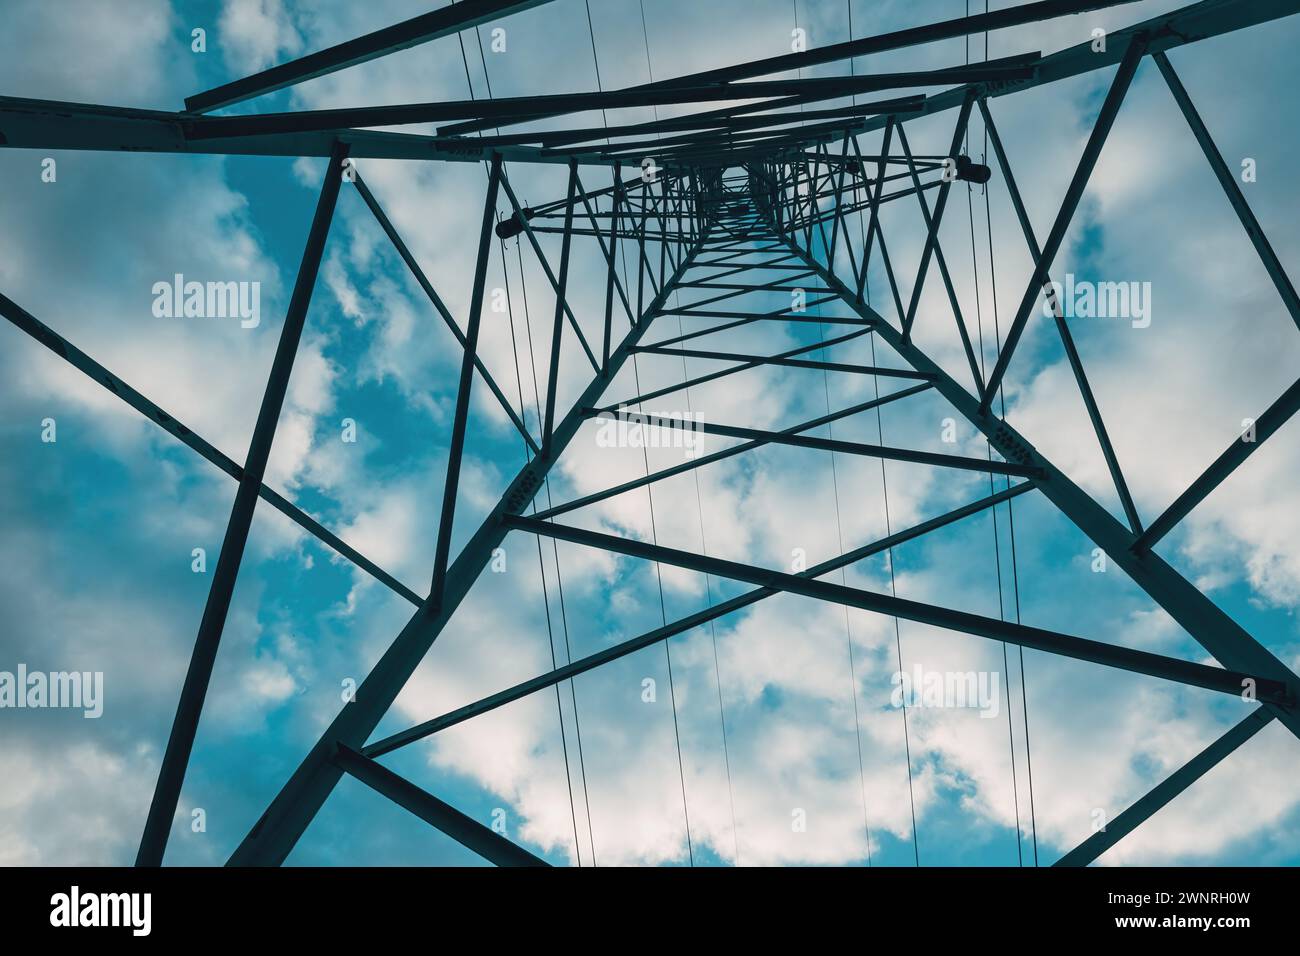 Electricity distribution tower from below, high voltage power lines under cloudy sky. Low angle view. Stock Photo